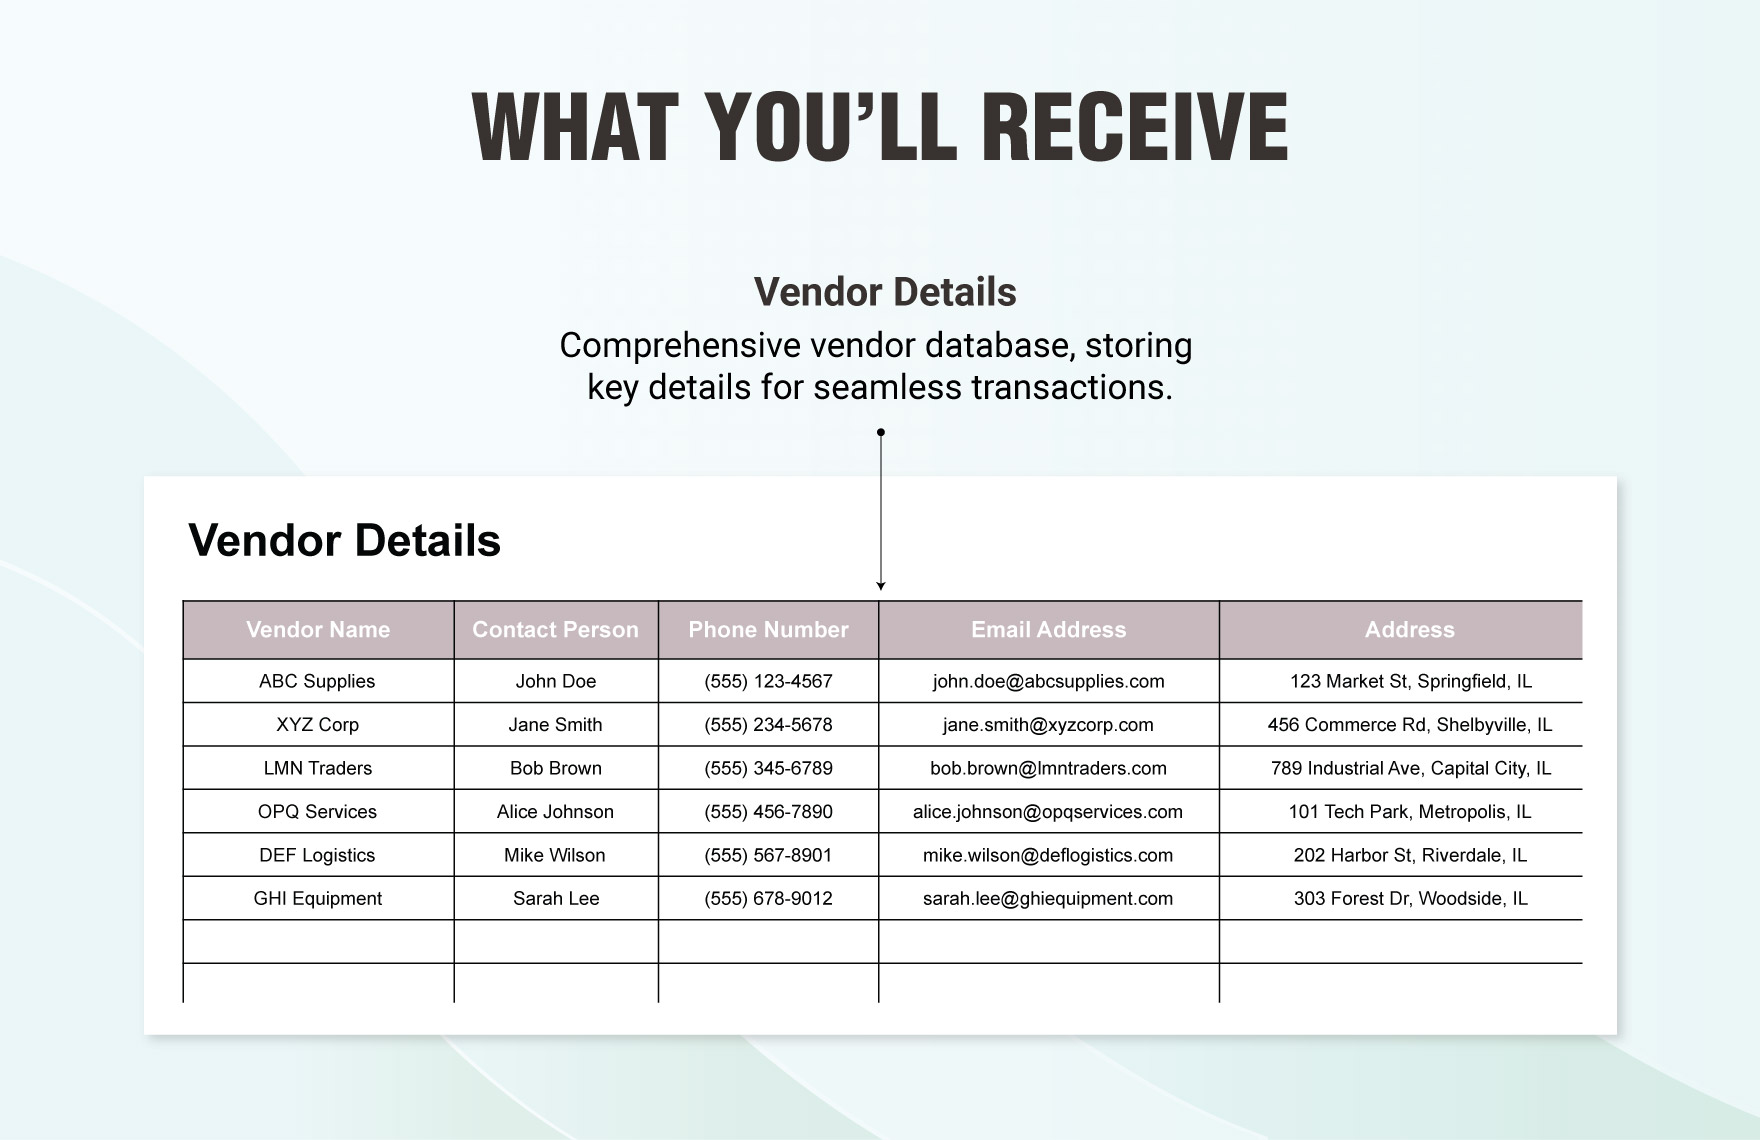 Vendor Payment Tracking Template